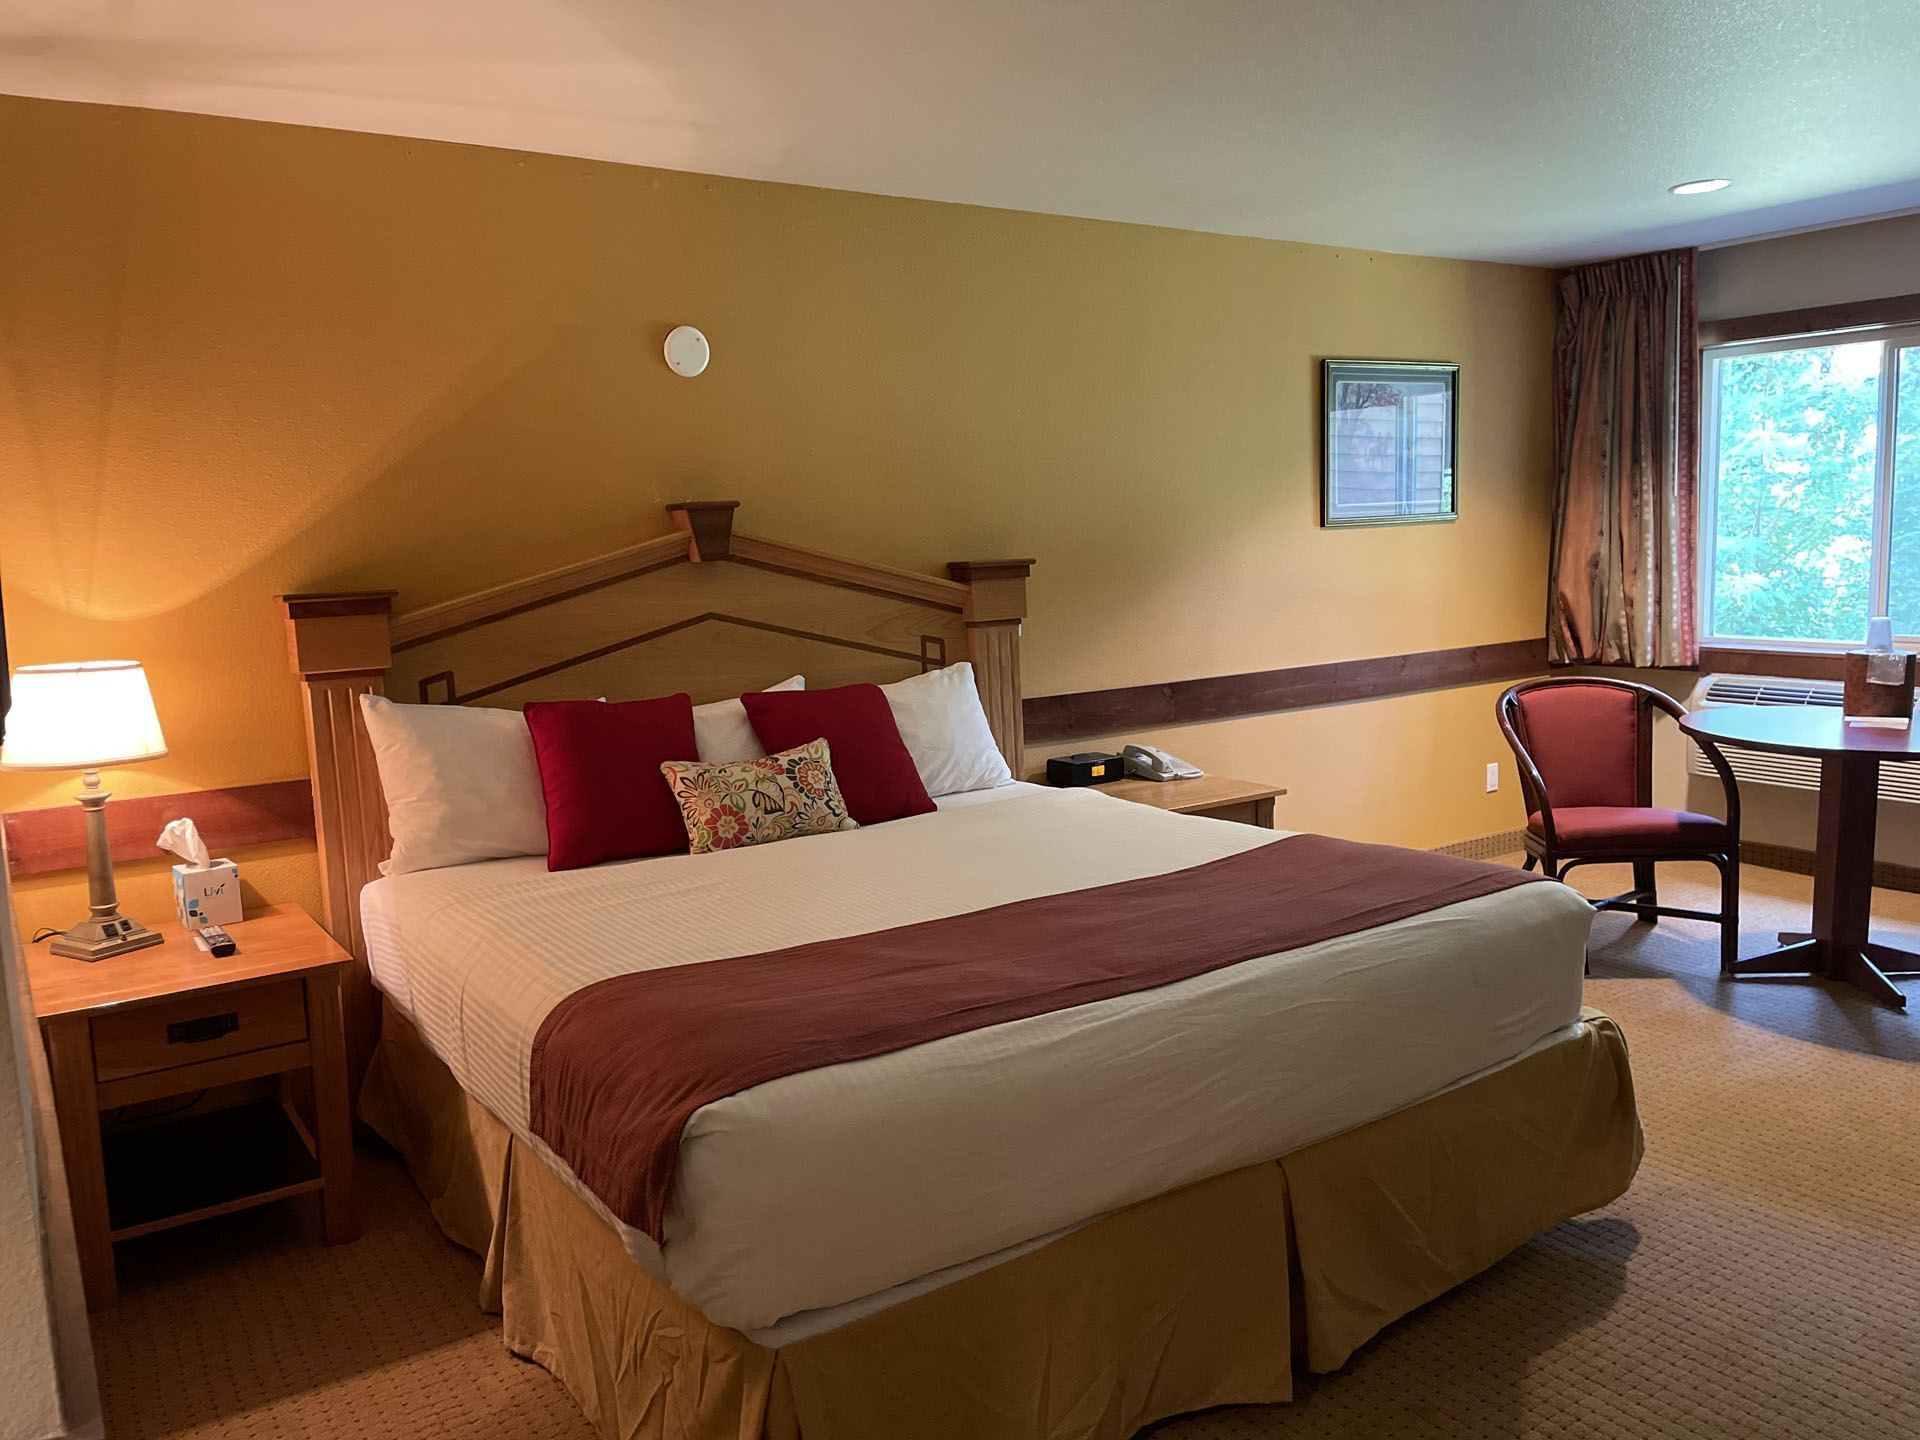 Deluxe King Room with Fireplace at Carson Hot Springs Resort